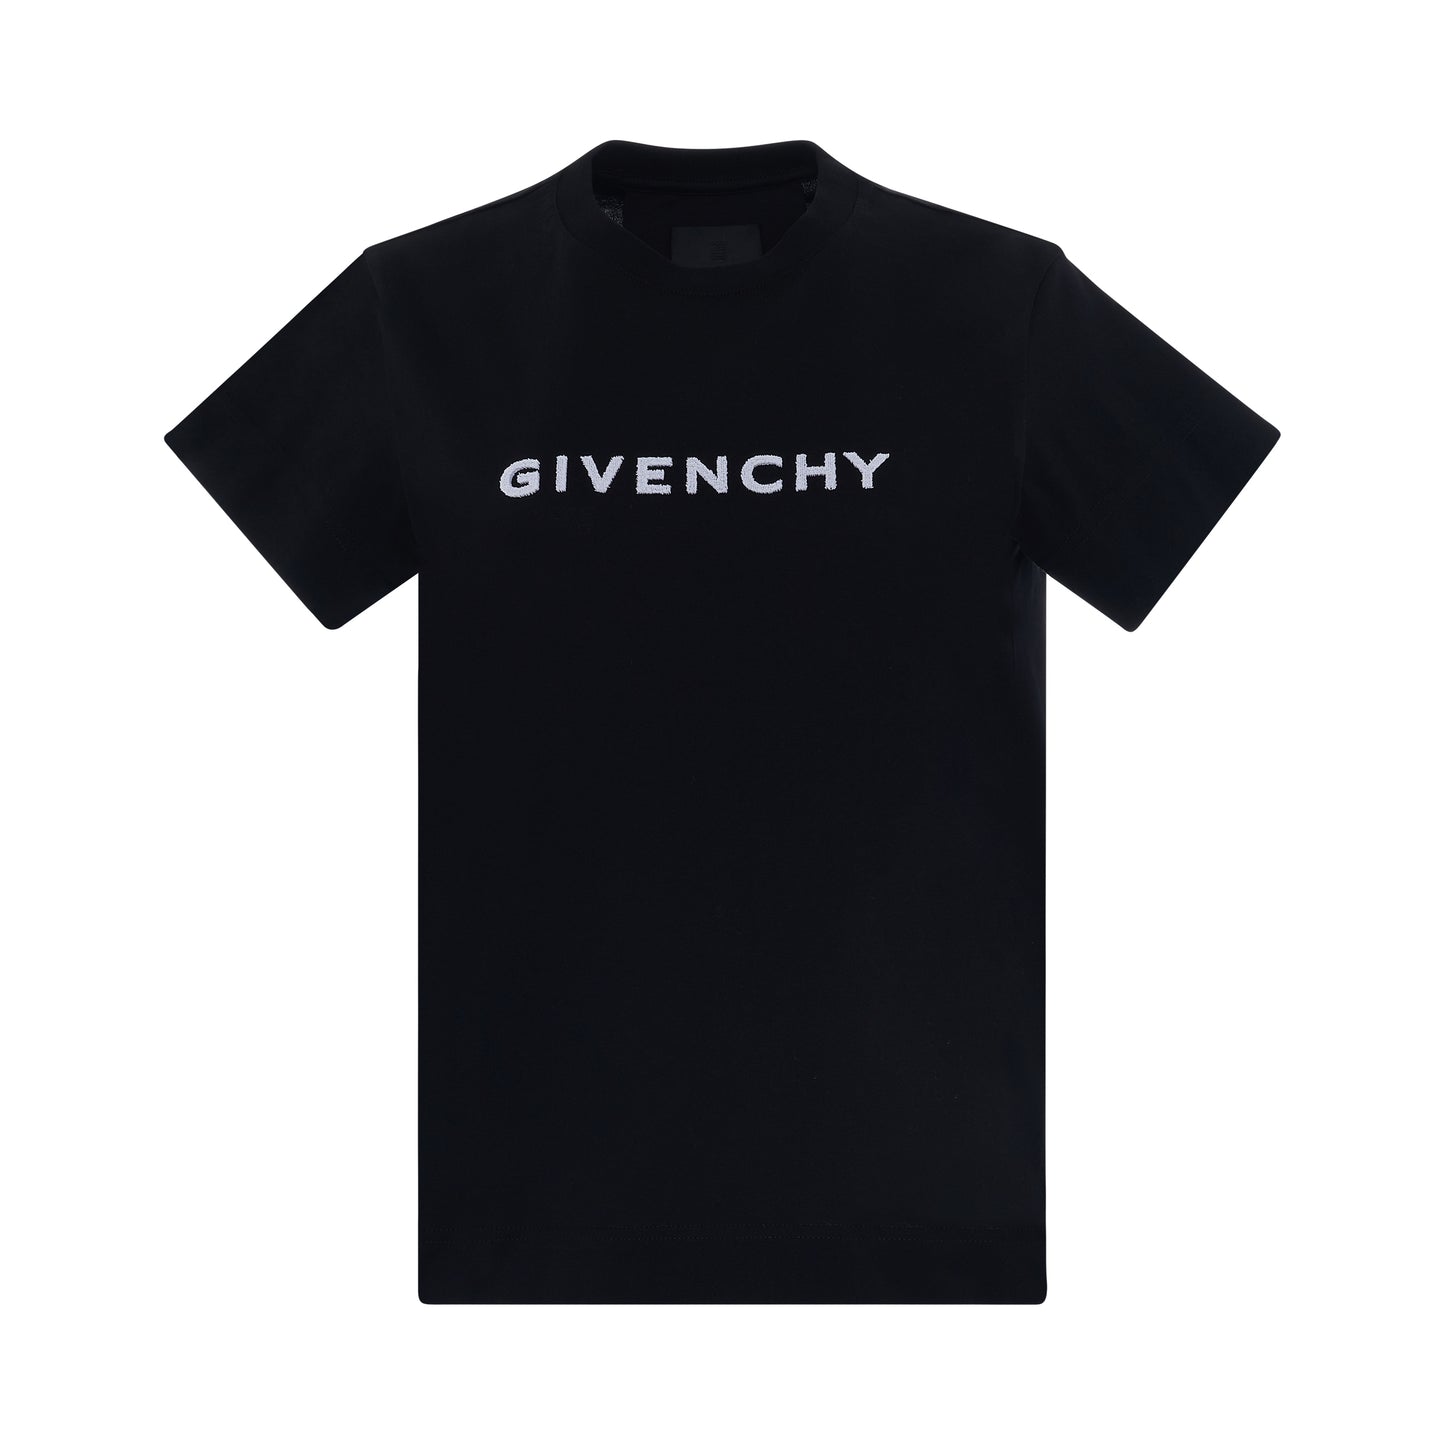 Logo and 4G Fit T-Shirt in Black